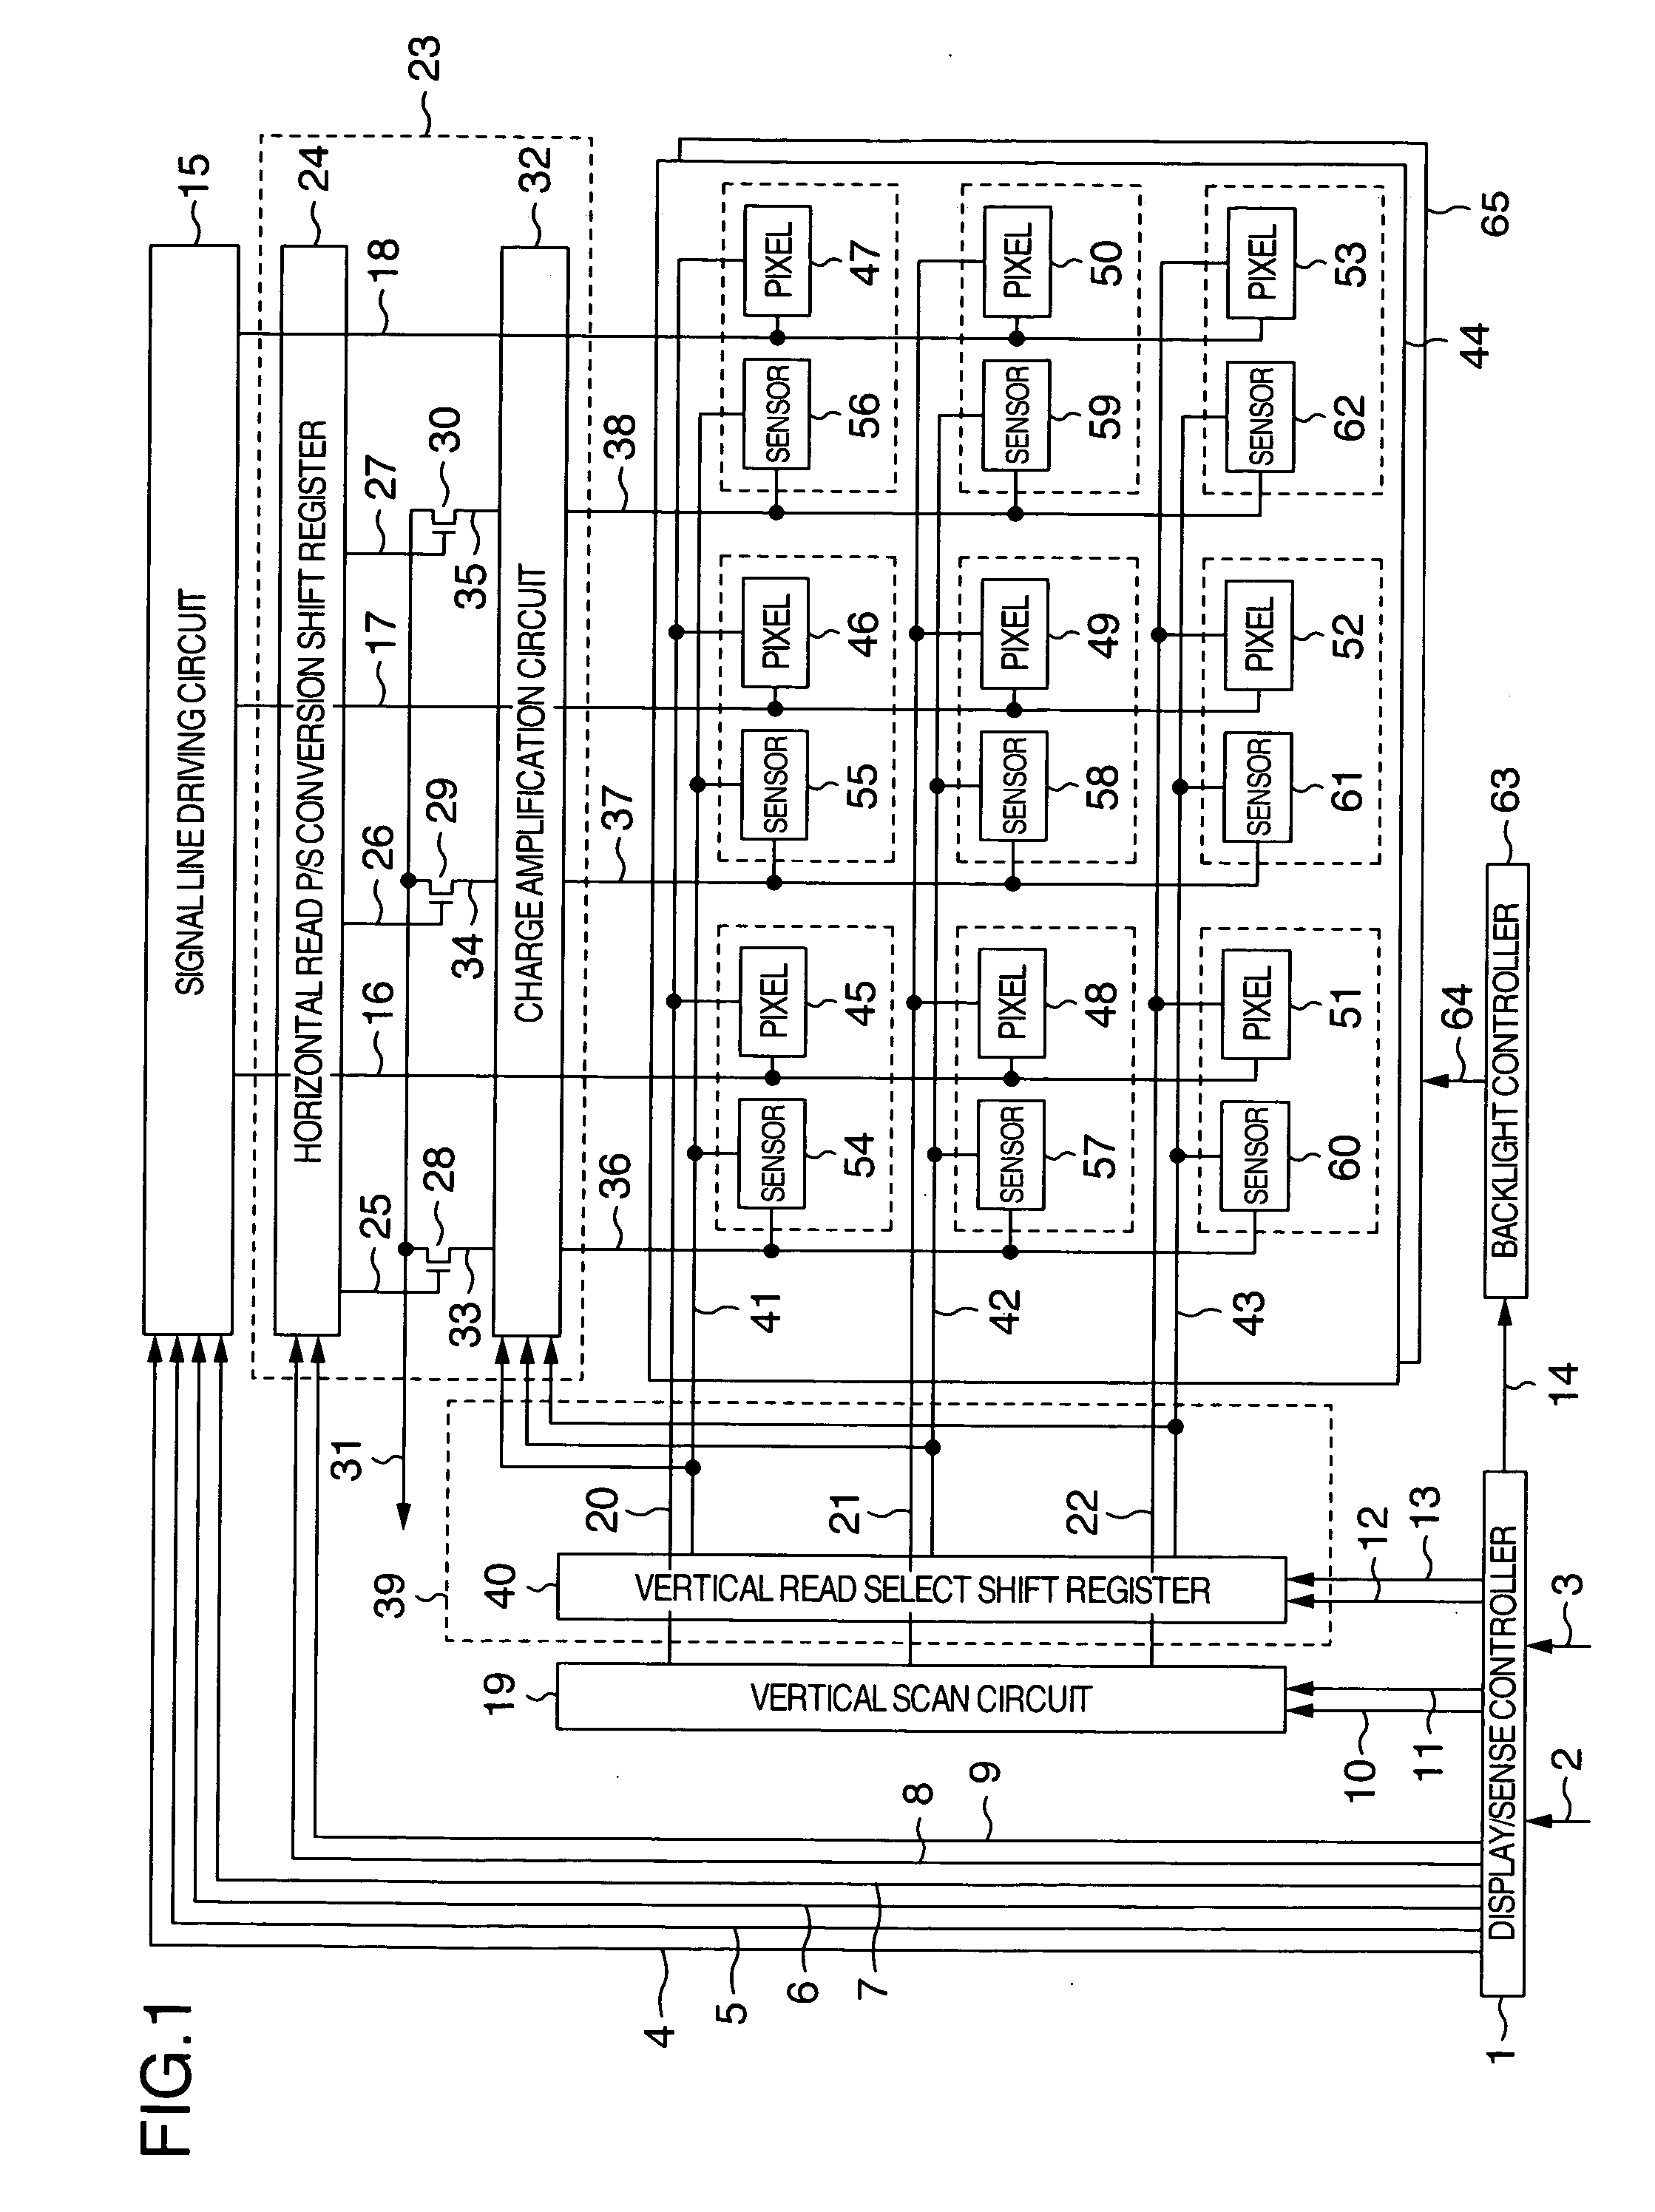 Display device with a touch screen